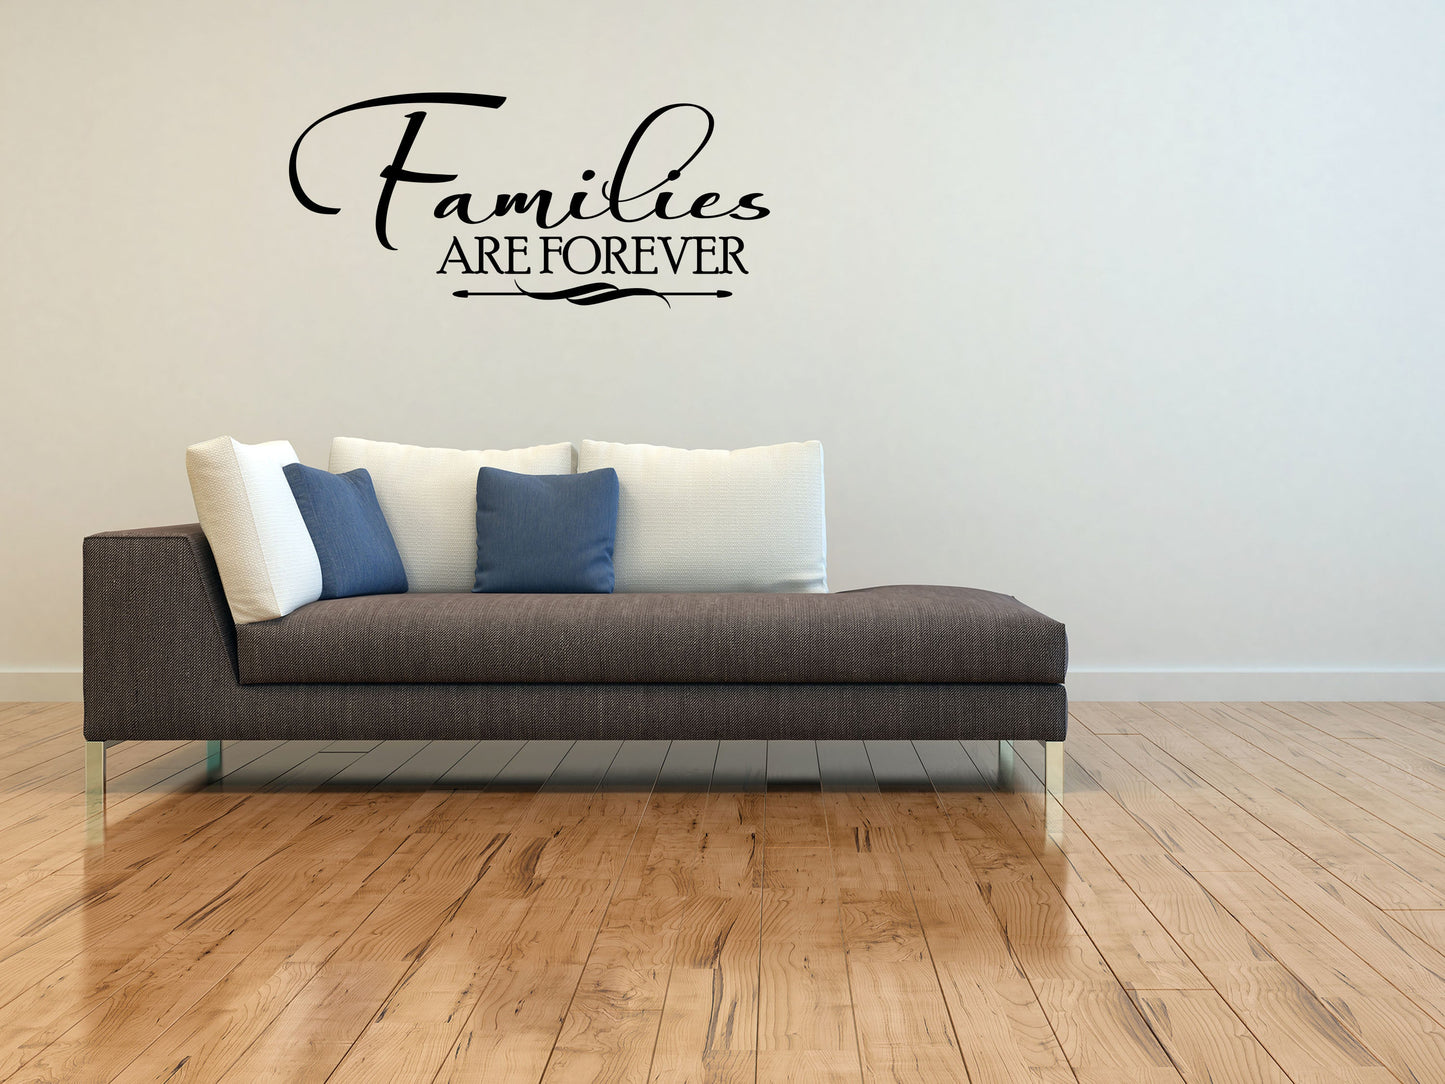 Family - Inspirational Wall Decals Vinyl Wall Decal Inspirational Wall Signs 